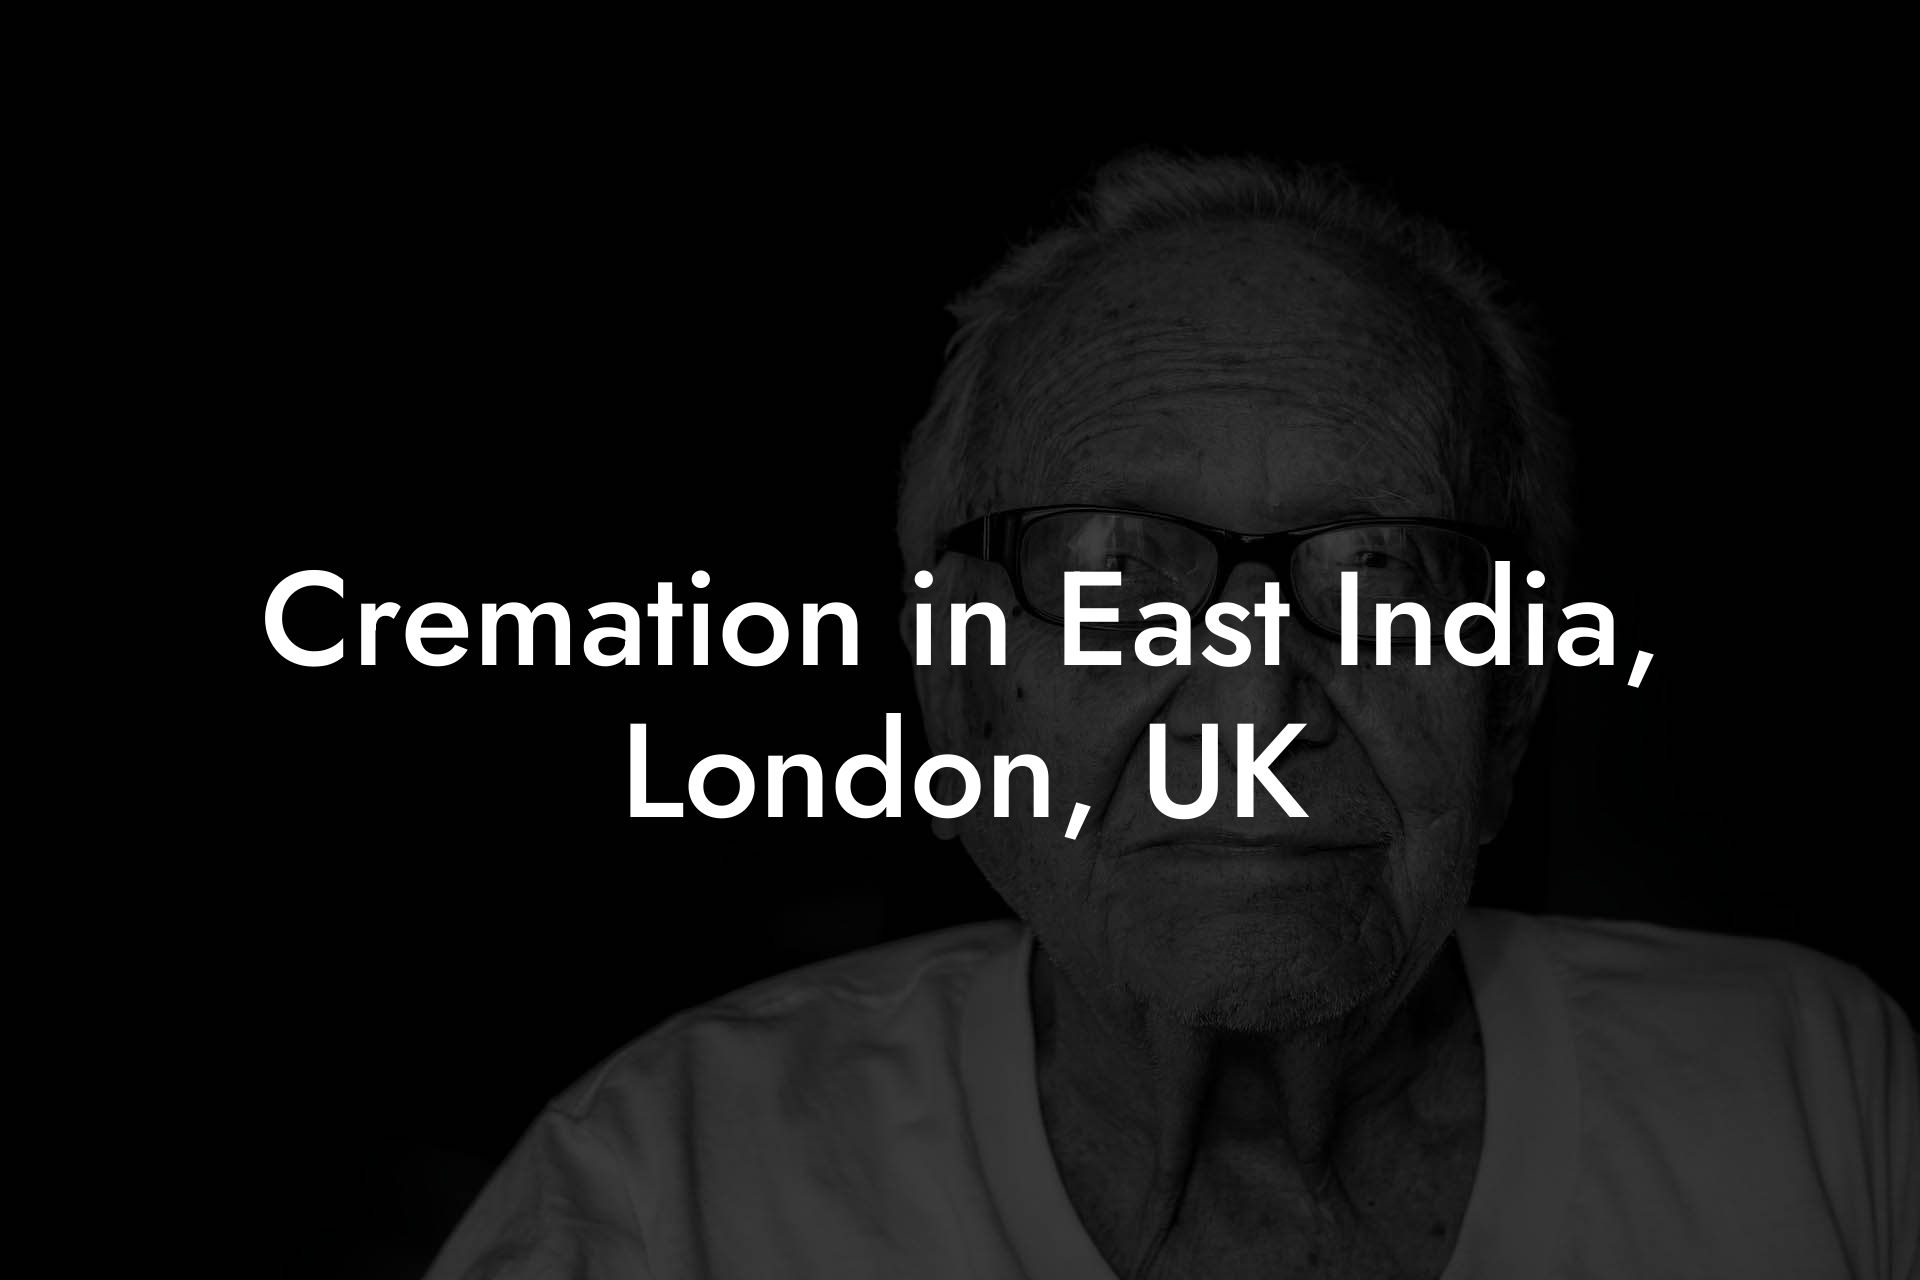 Cremation in East India, London, UK